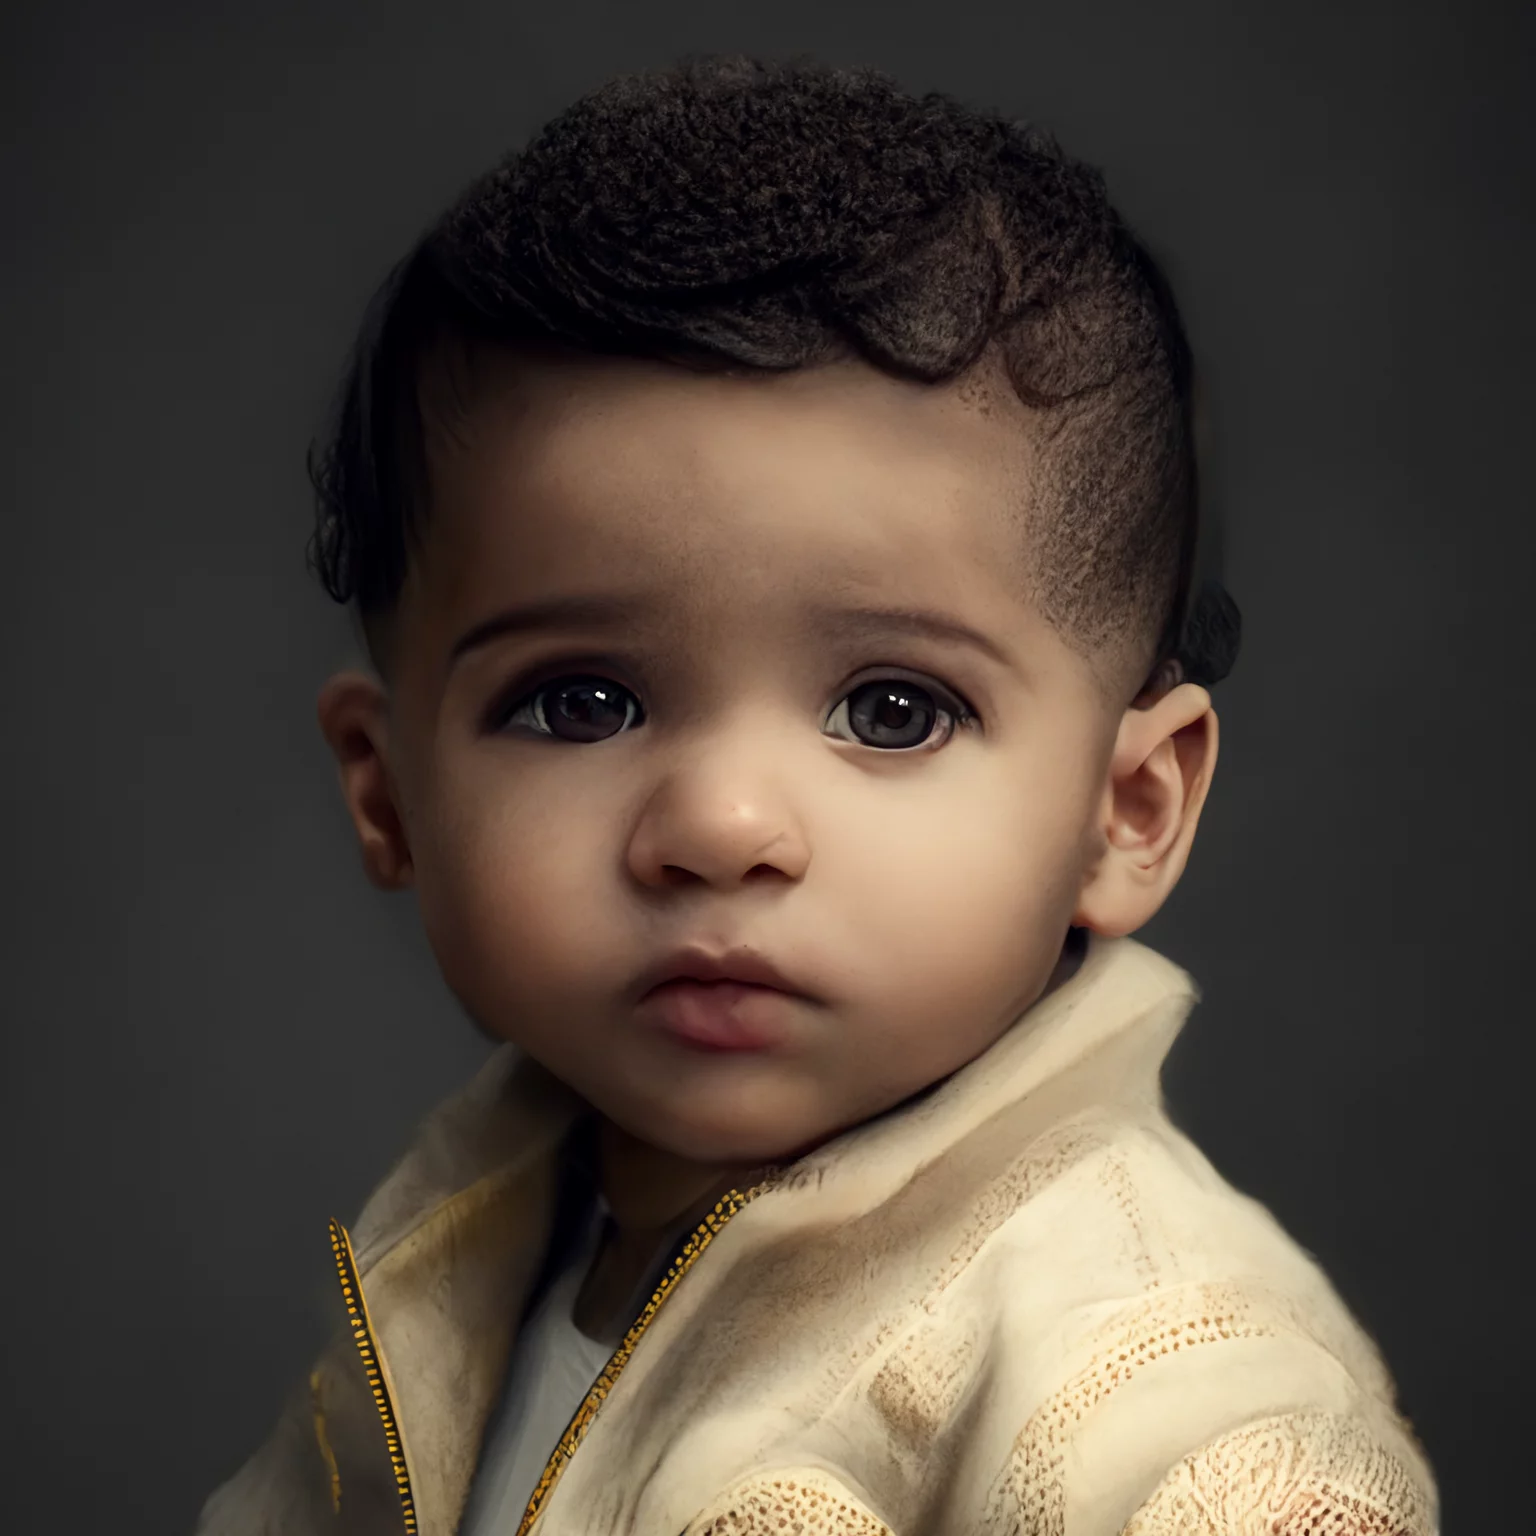 Baby Drake with iconic hair